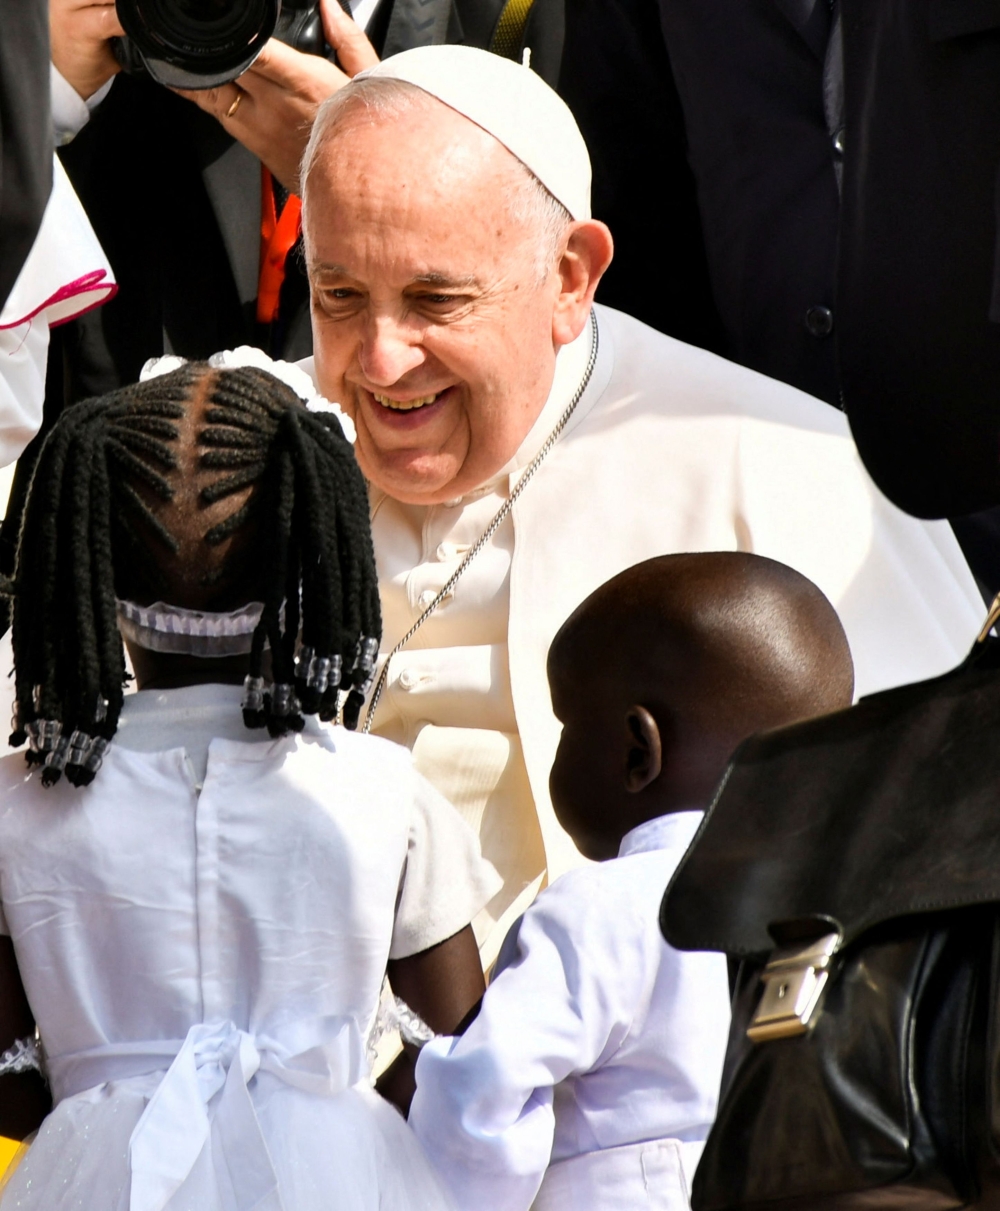 [News] Raise your voices against South Sudan injustice, pope tells Churches